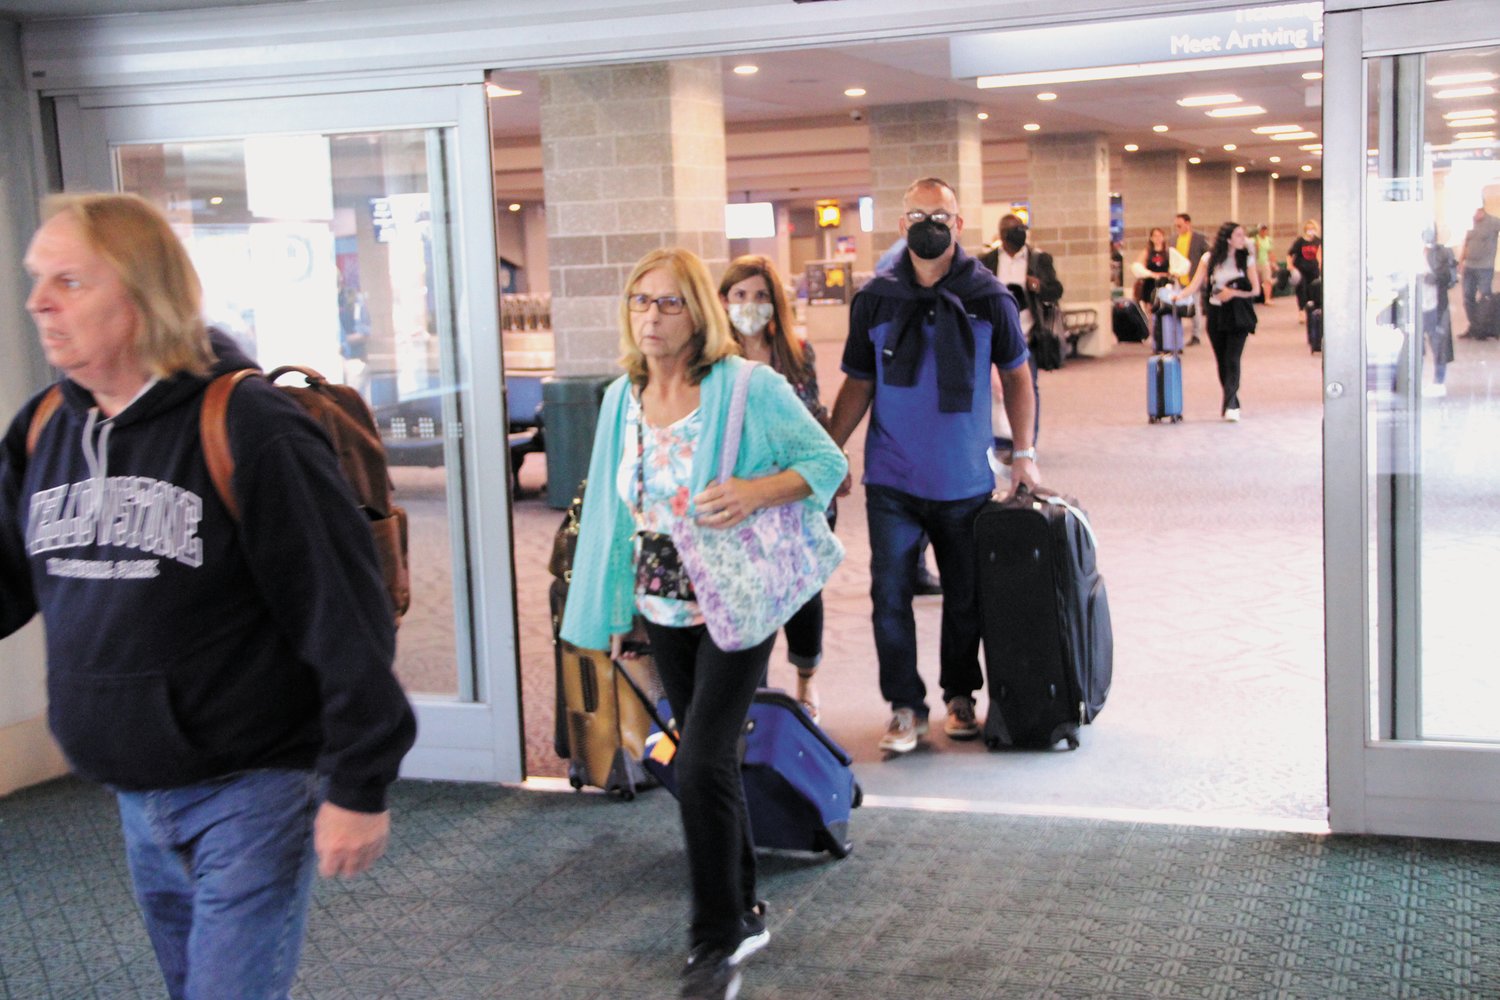 LEISURE TRAVEL RETURNS: Passenger traffic is returning to Green Airport with numbers for March approaching 85 percent of what they were for March 2019. Overall, industry wide, leisure travel has made a far better return than business travel. (Warwick Beacon photo)